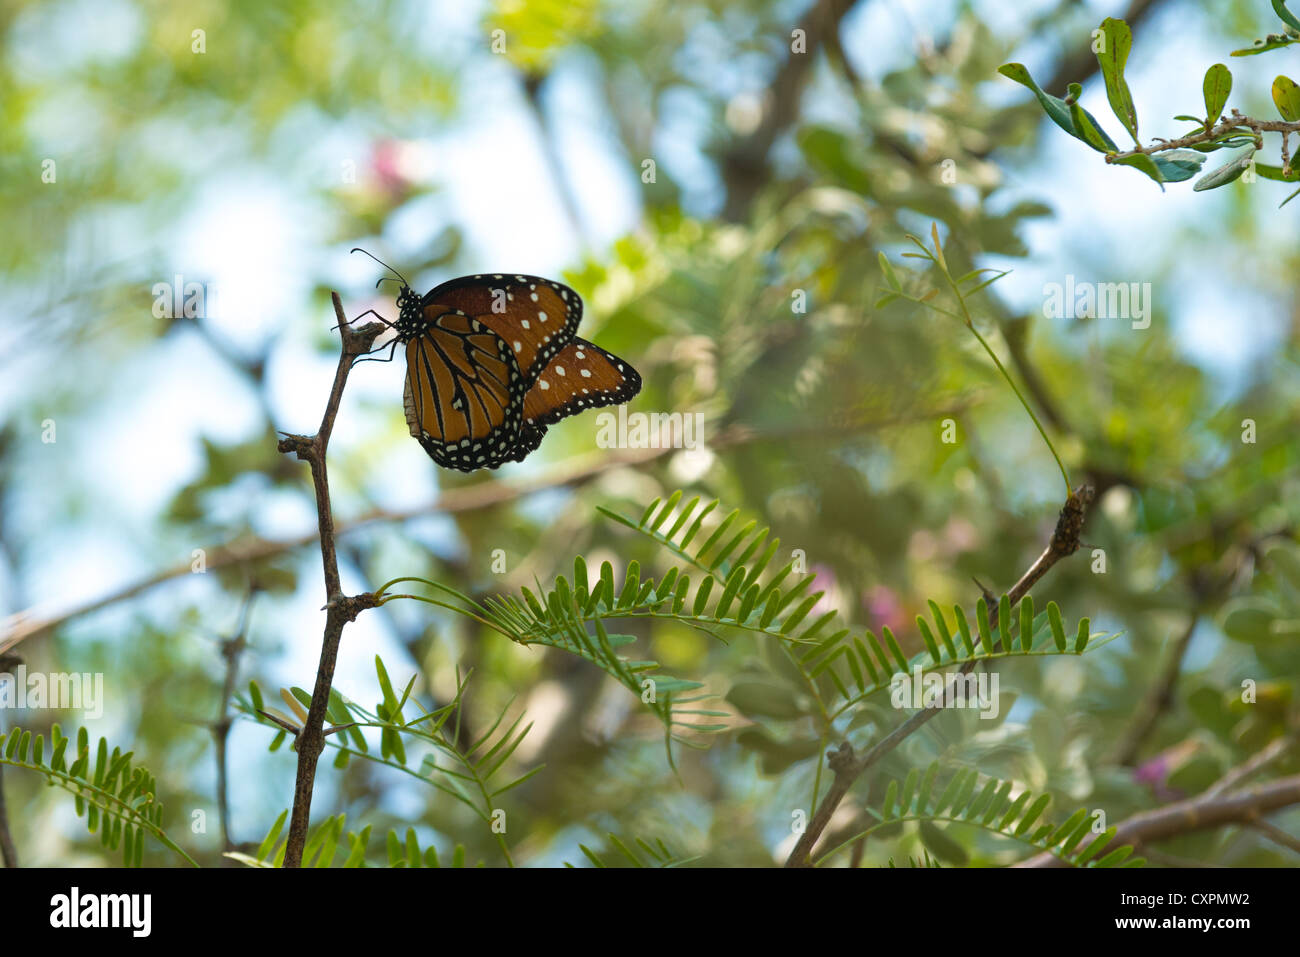 Monarch butterfly, Big Bend National Park, Texas. Stock Photo